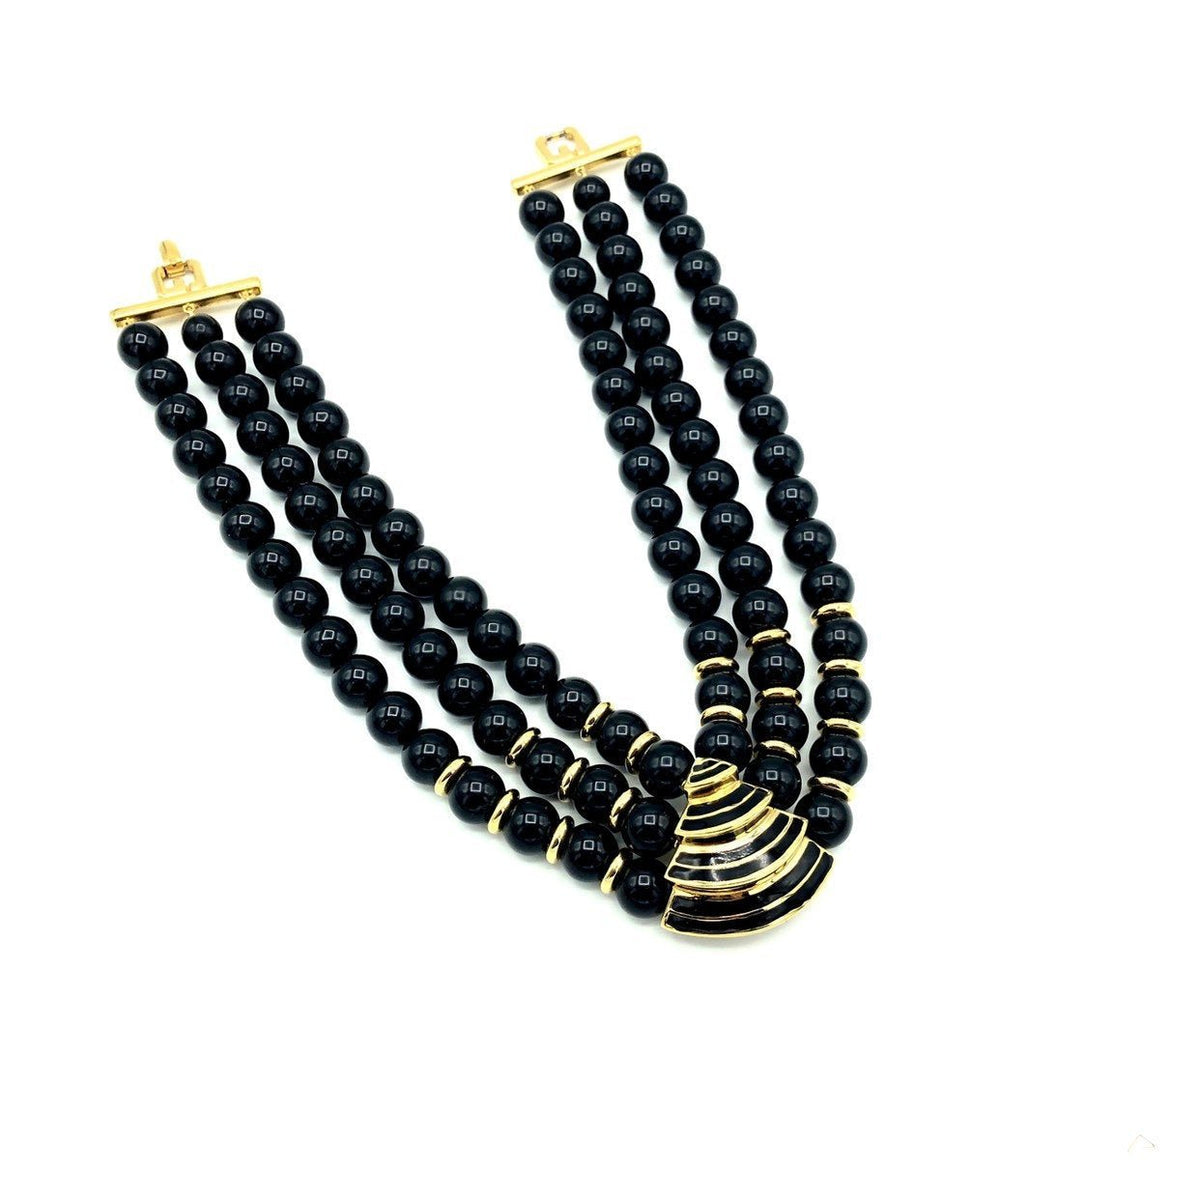 Givenchy Black Lucite Three Bead Strand Modernist Vintage Pendant - 24 Wishes Vintage Jewelry